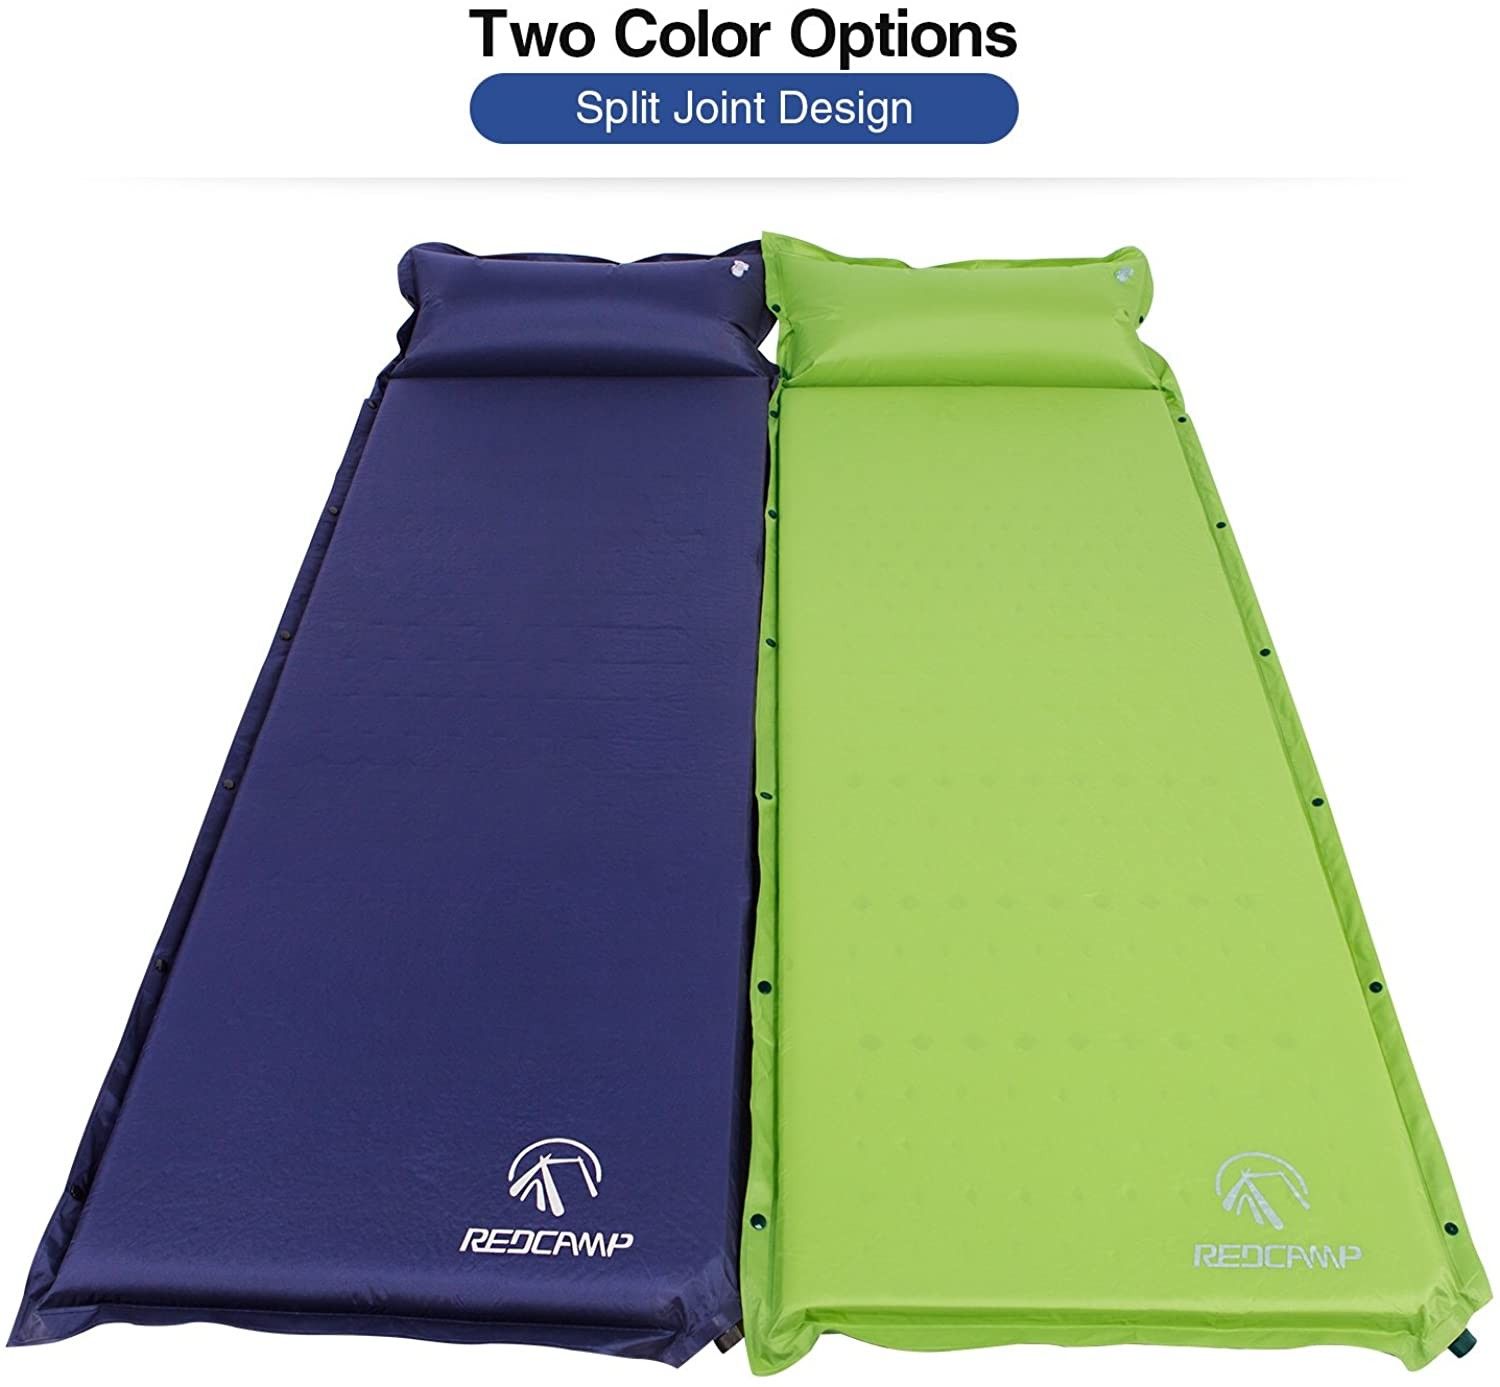 Brand New Redcamp Self Inflating Pad & Pillow